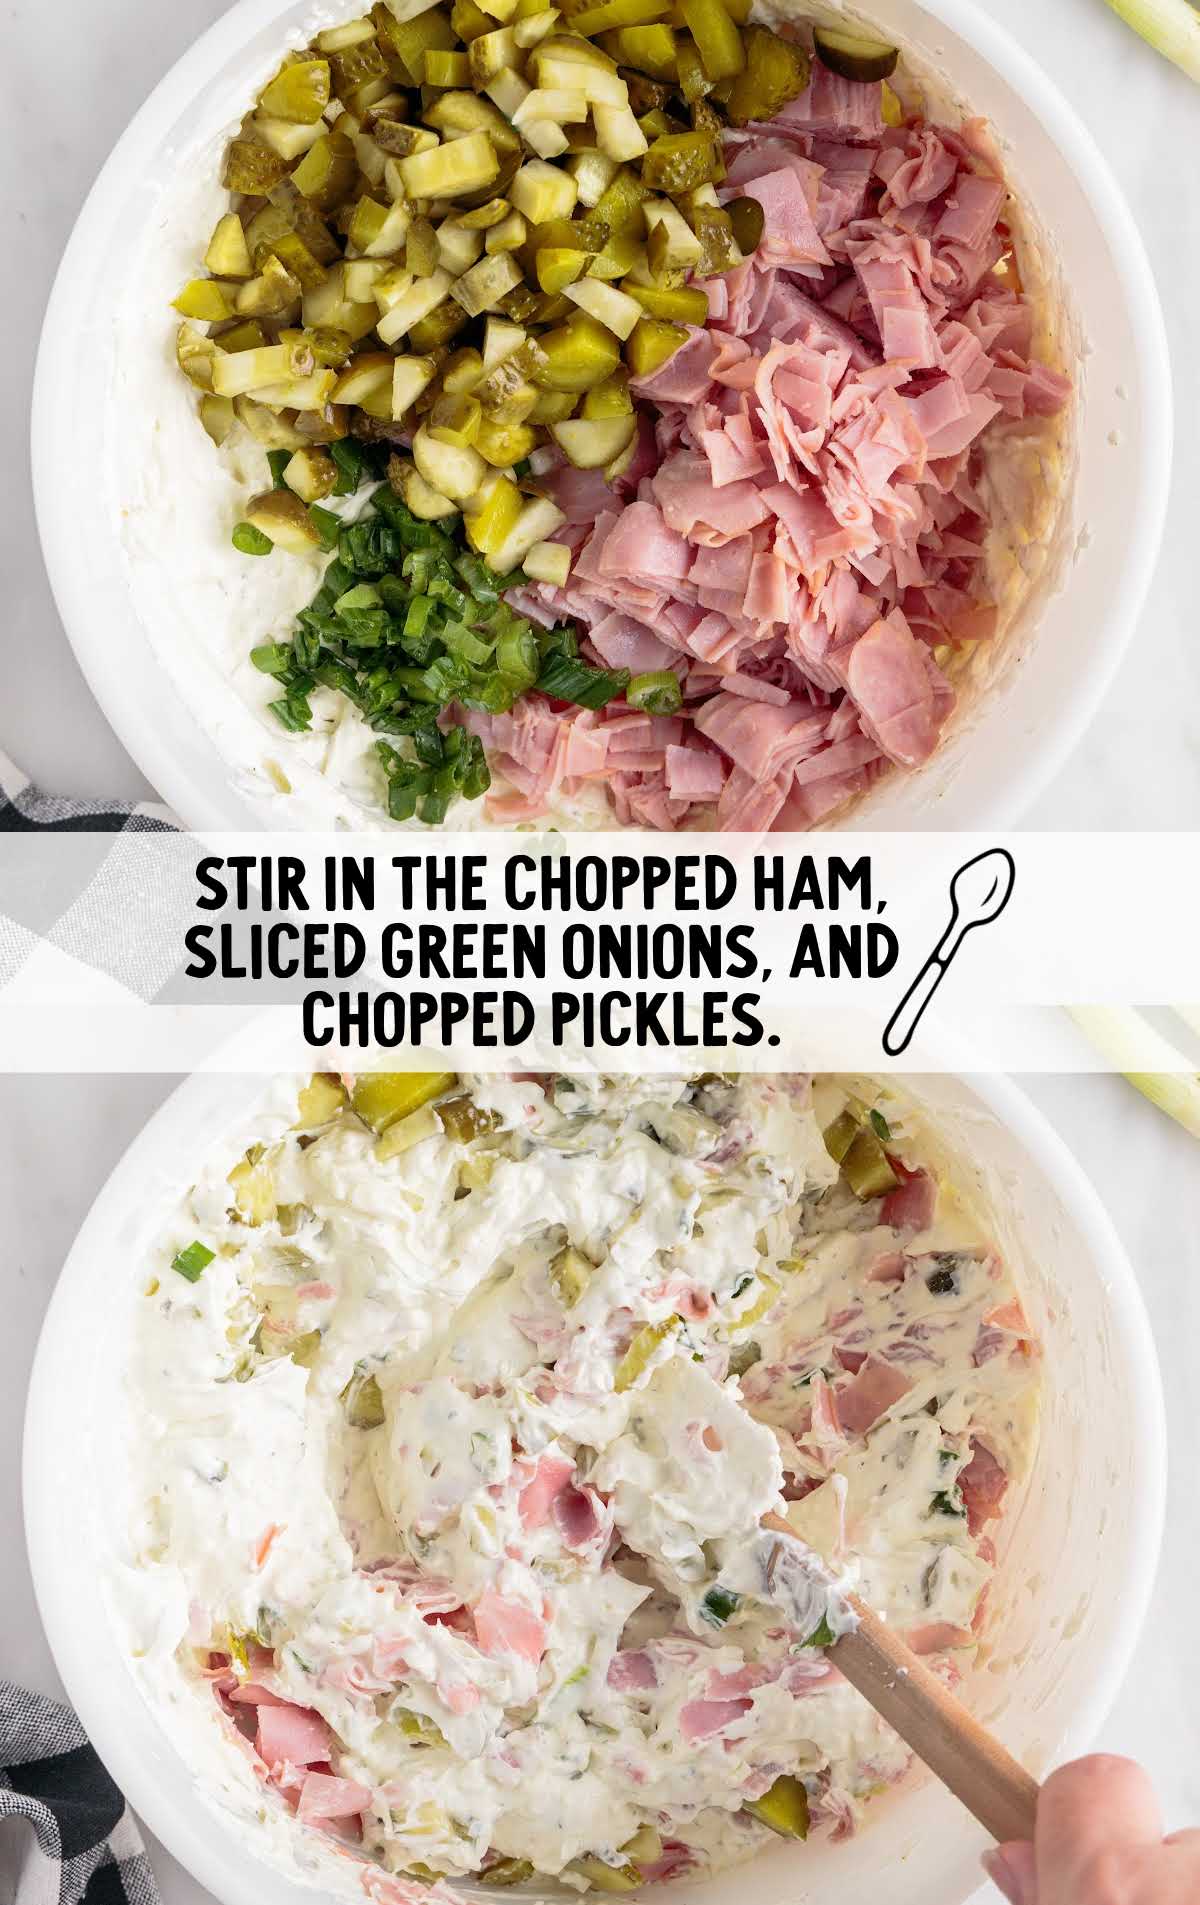 chopped deli ham, sliced green onions, and chopped pickles being folded together in a bowl